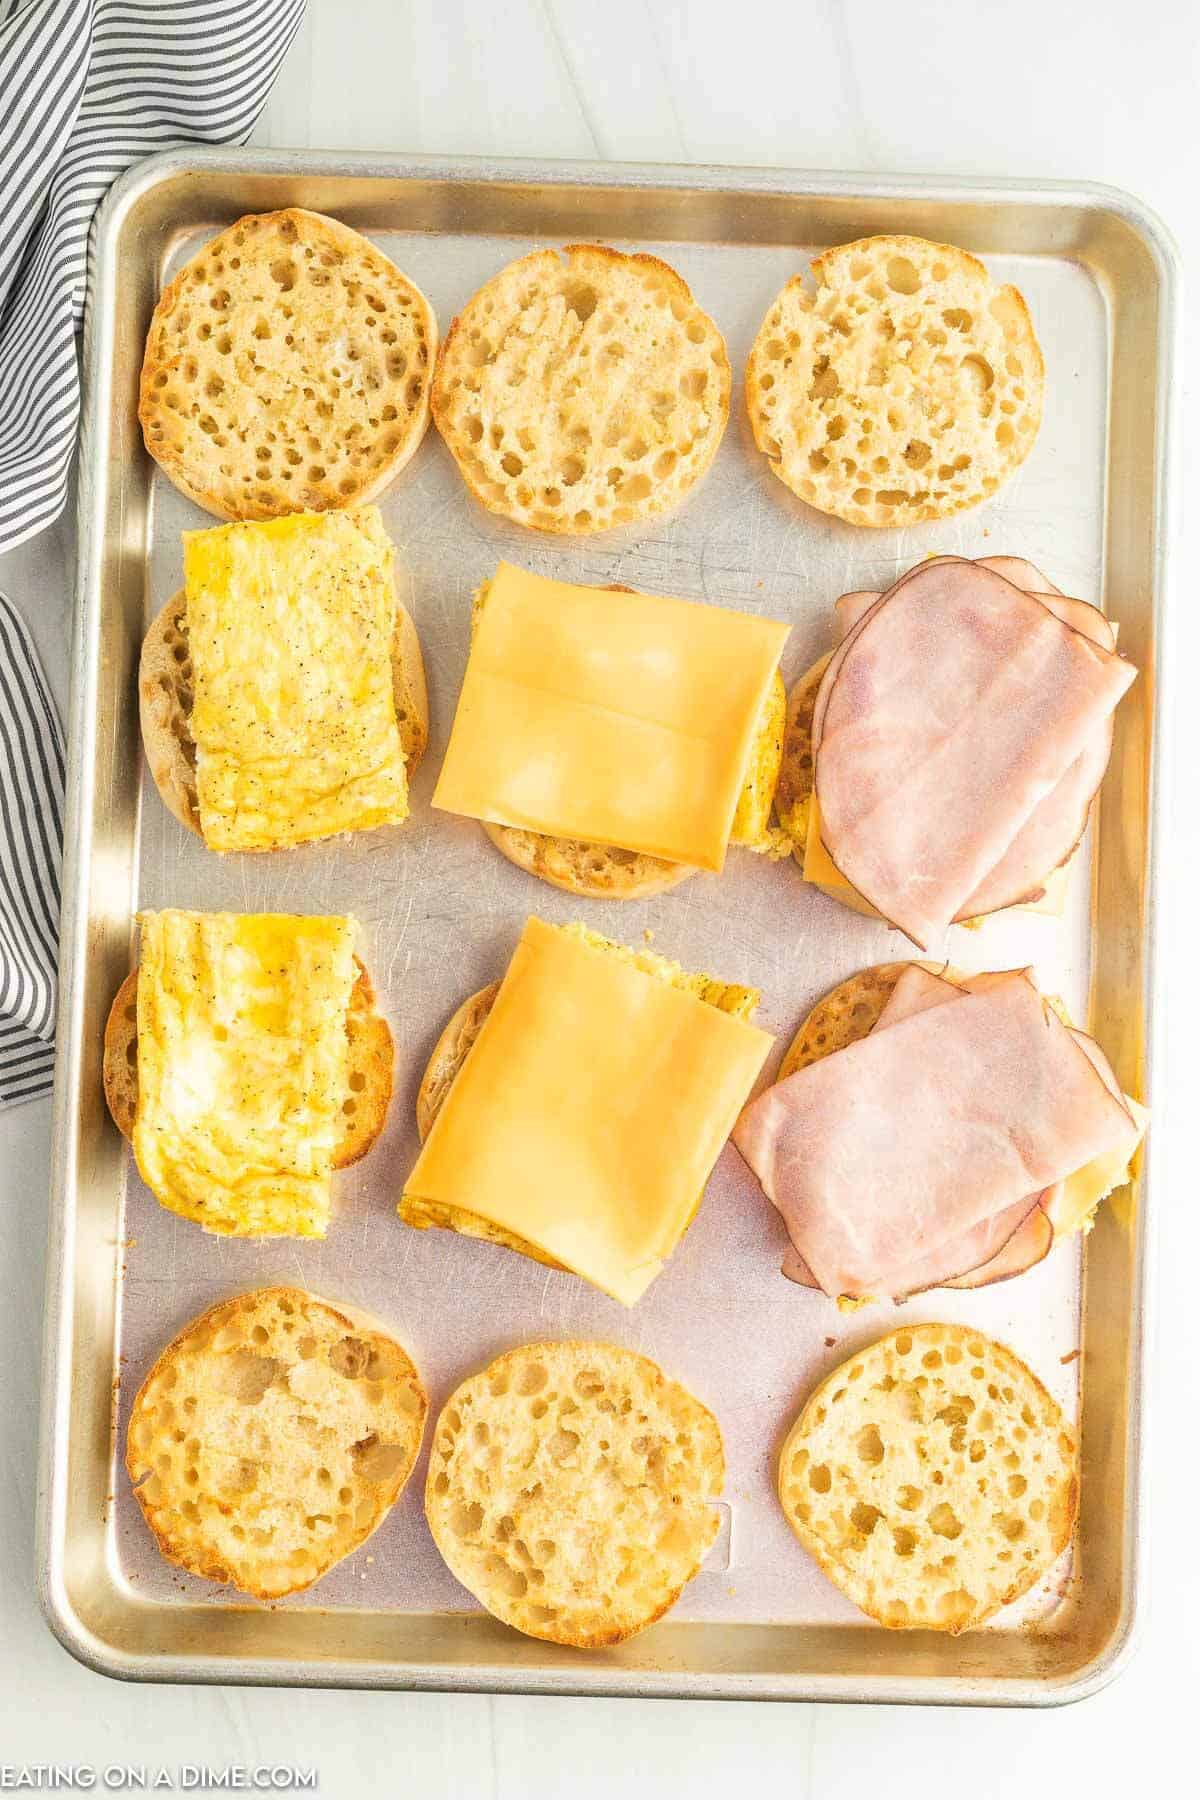 Topping the toasted English Muffins with egg, cheese and ham